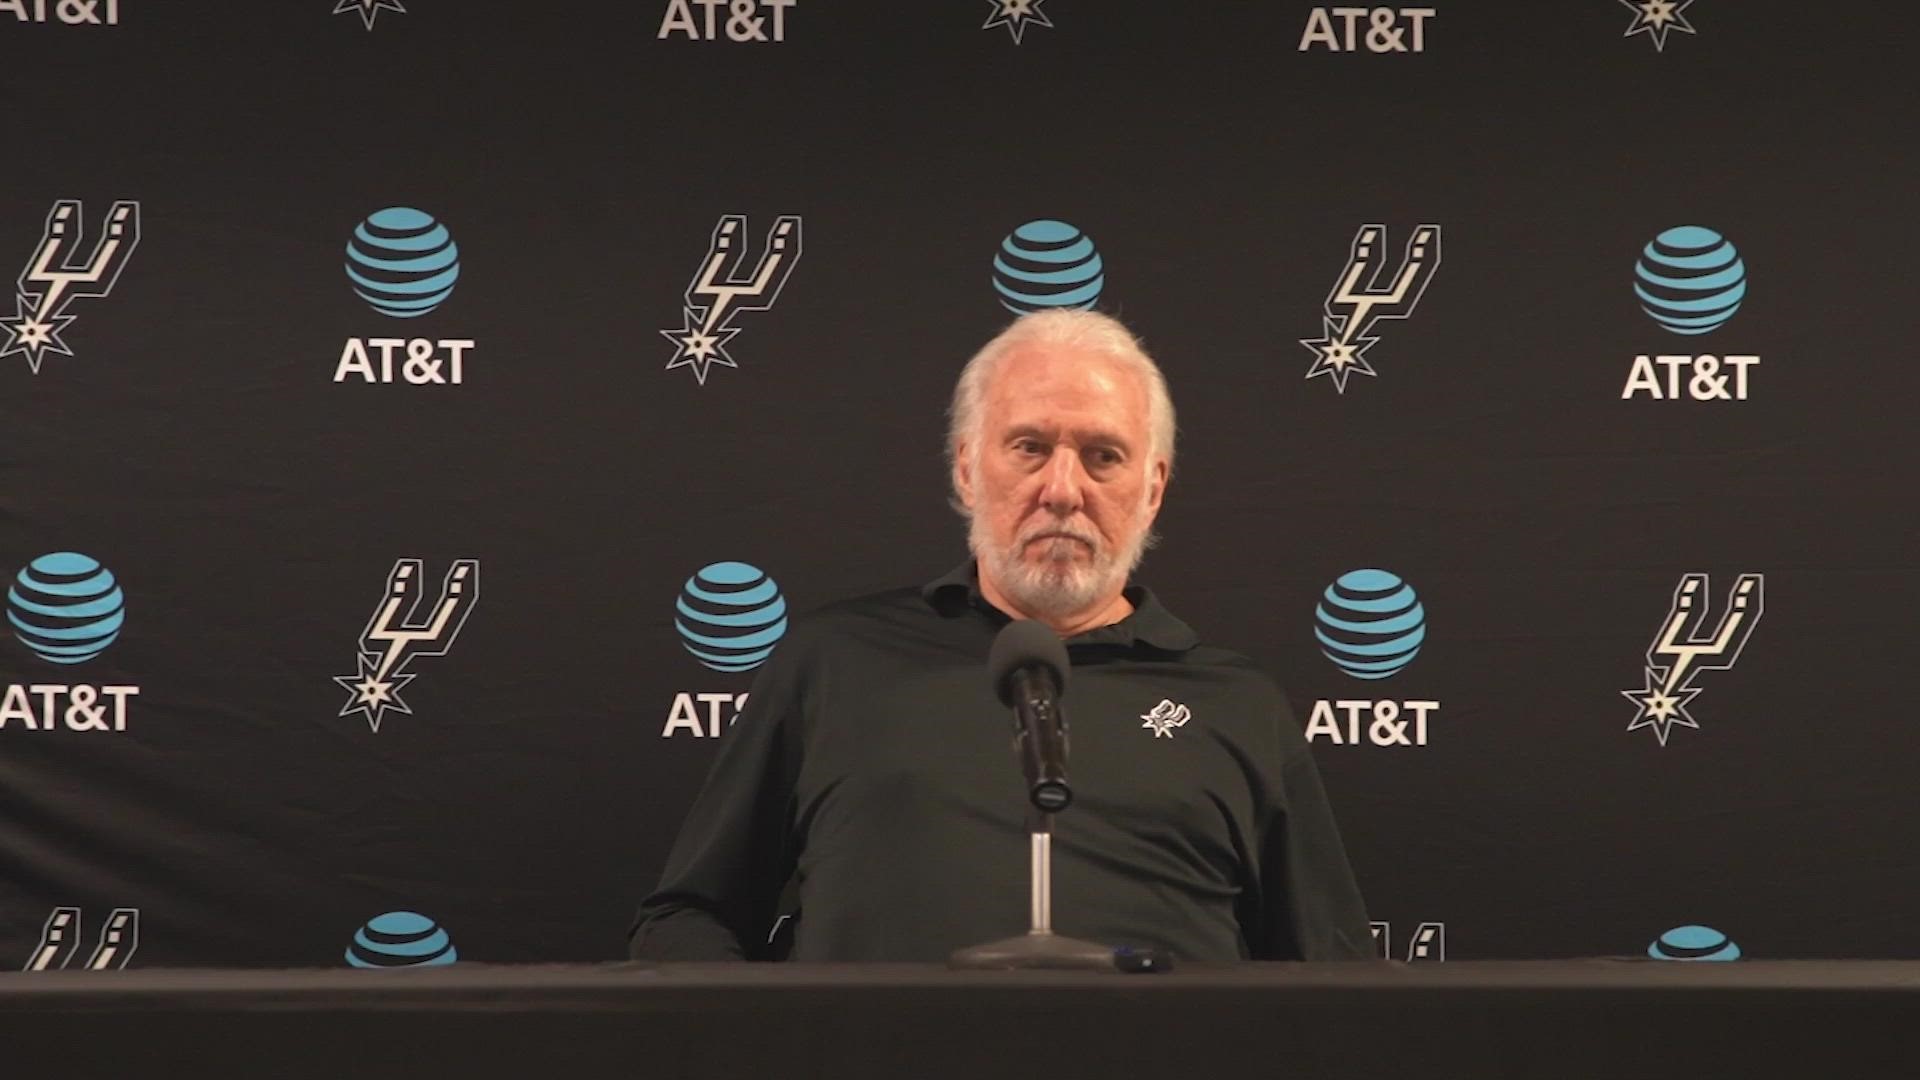 "We played hard, so we’re thrilled with the victory," said Popovich, who had praise for White, Poeltl, Walker, and Primo after the big win.